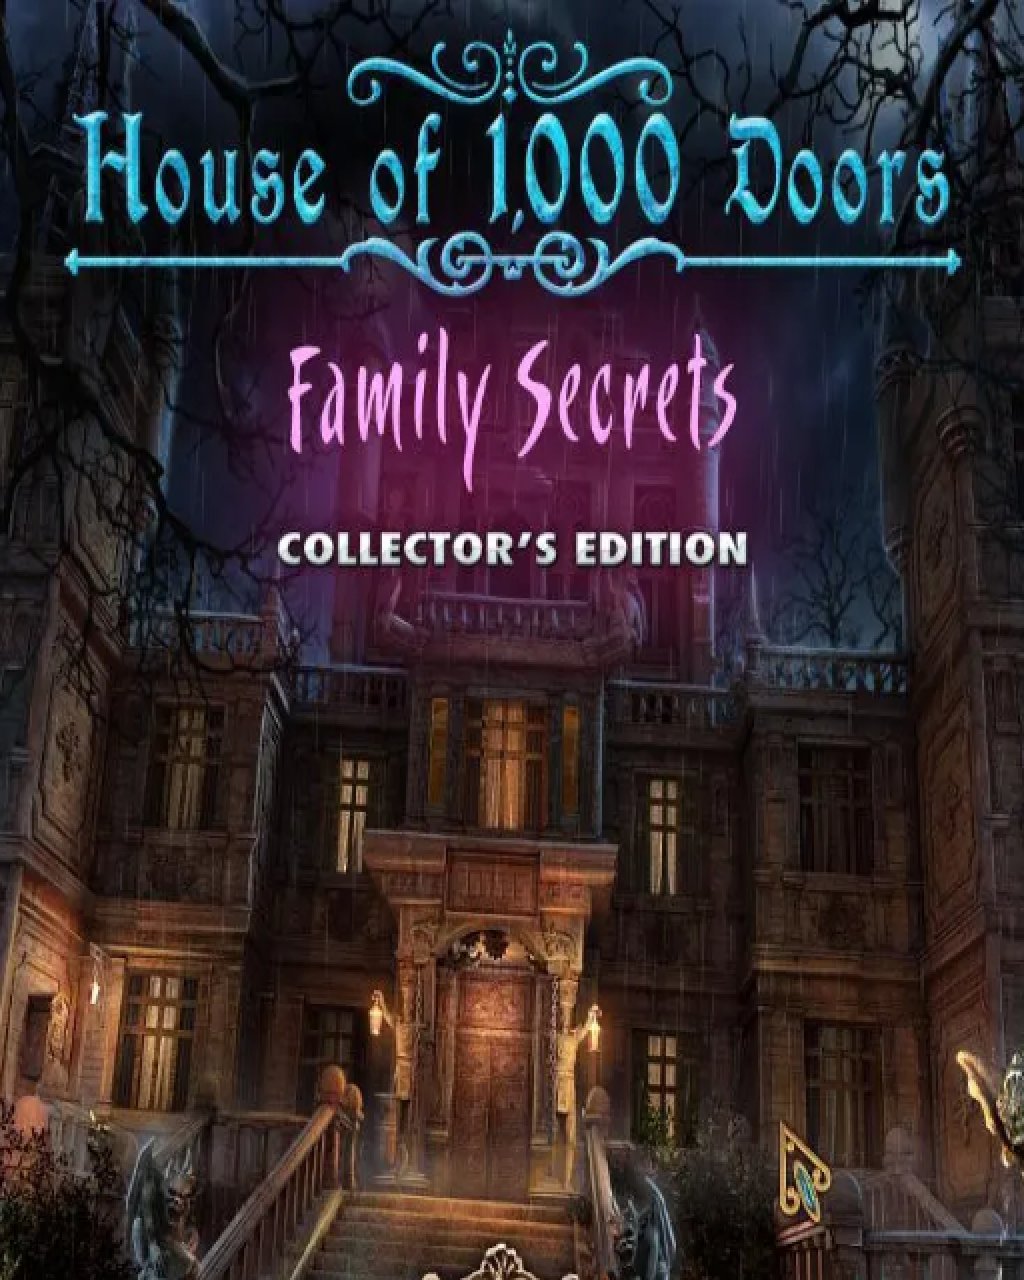 House of 1000 Doors Family Secrets Collector's Edition